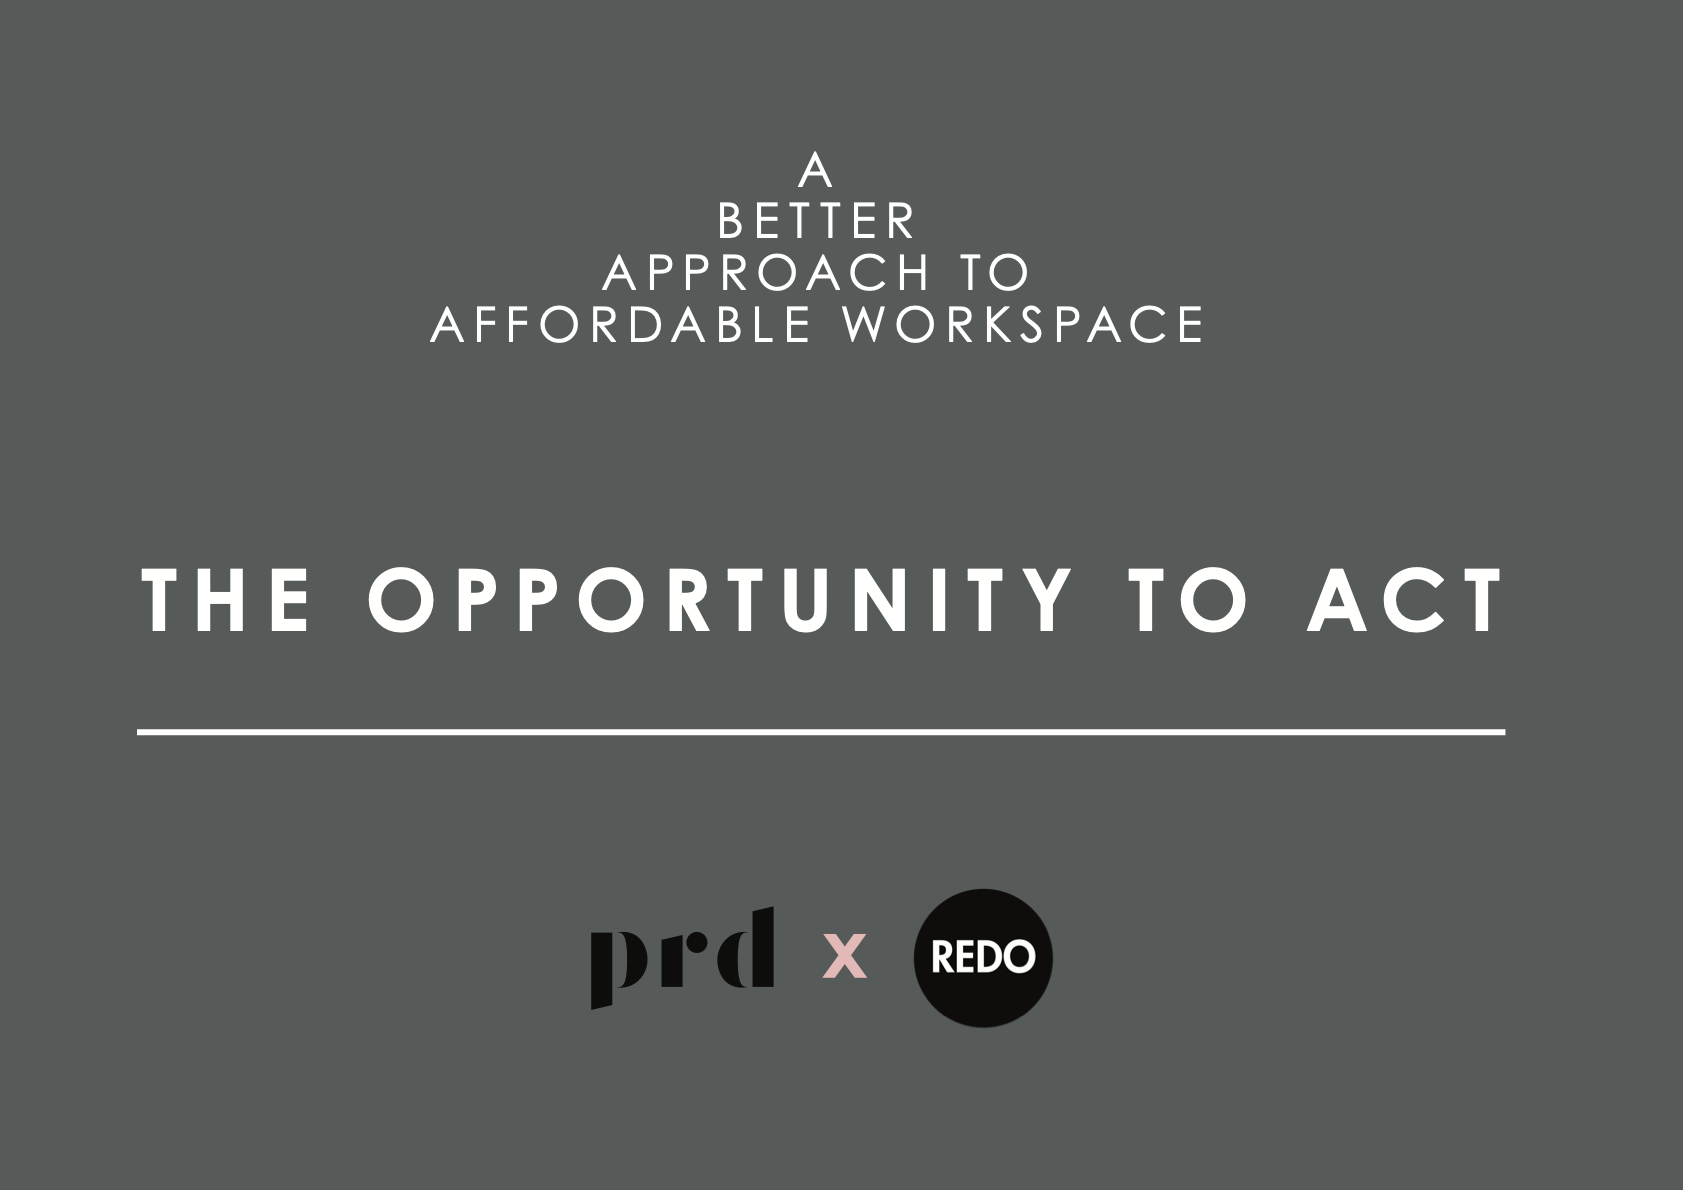 PRD x REDO_A Better Approach to Affordable Workspace_The Opportunity to Act-27 (dragged).png